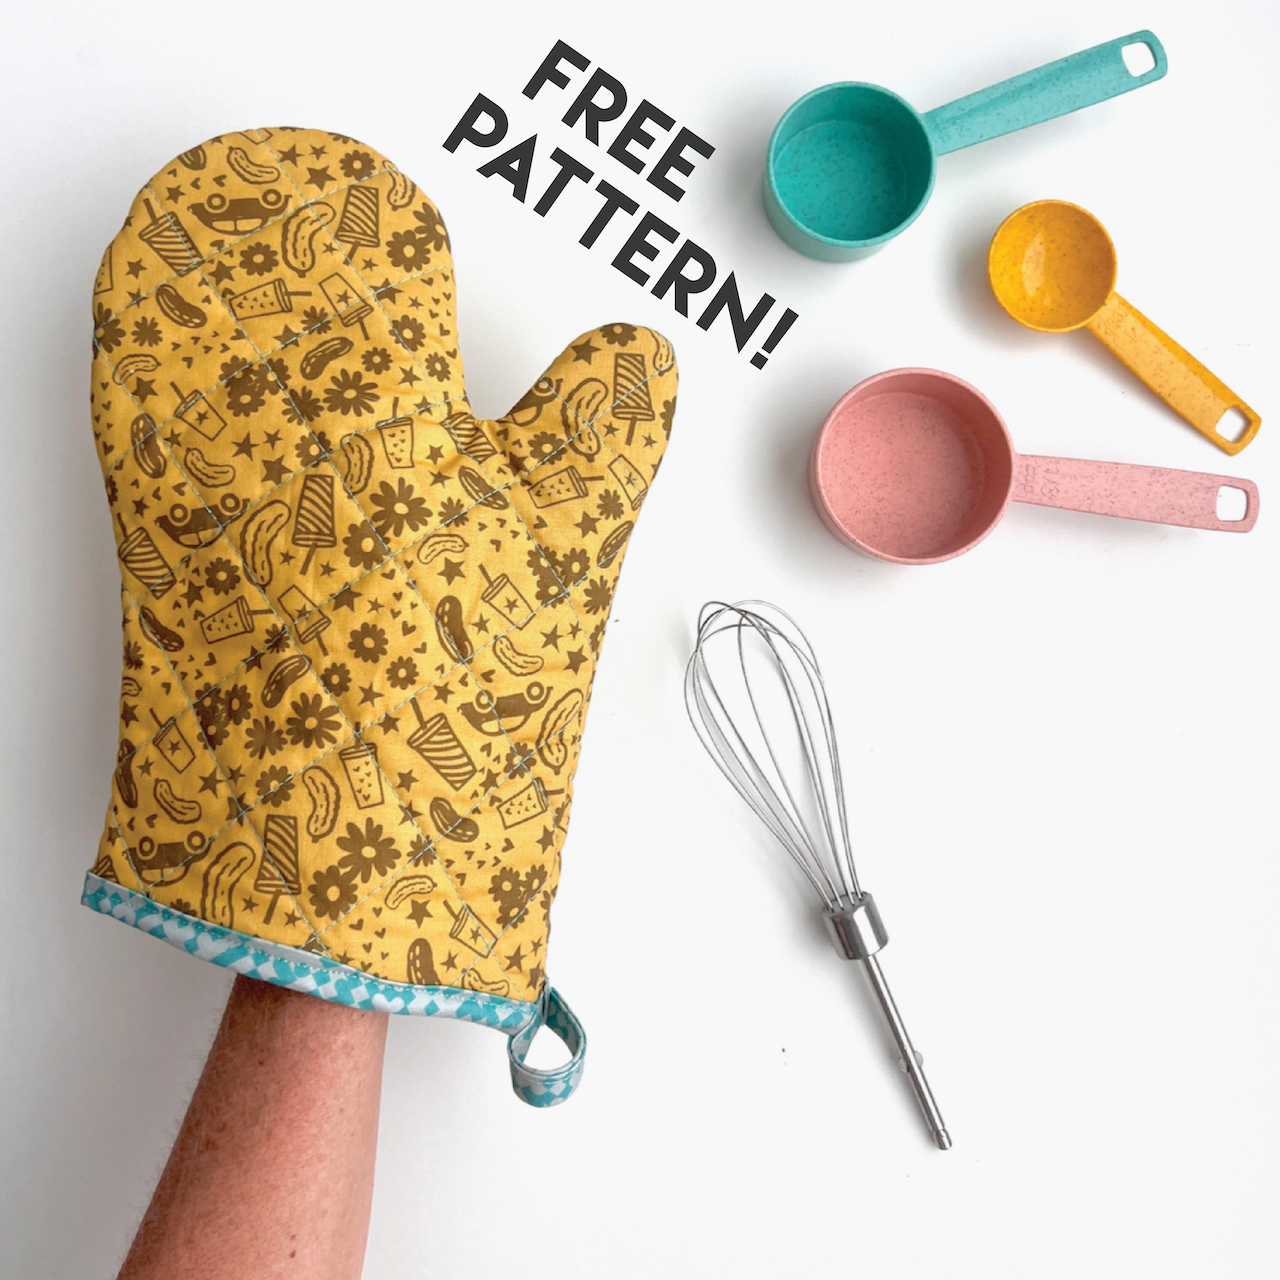 How to Make an Oven Mitt- FREE pattern & Tutorial 